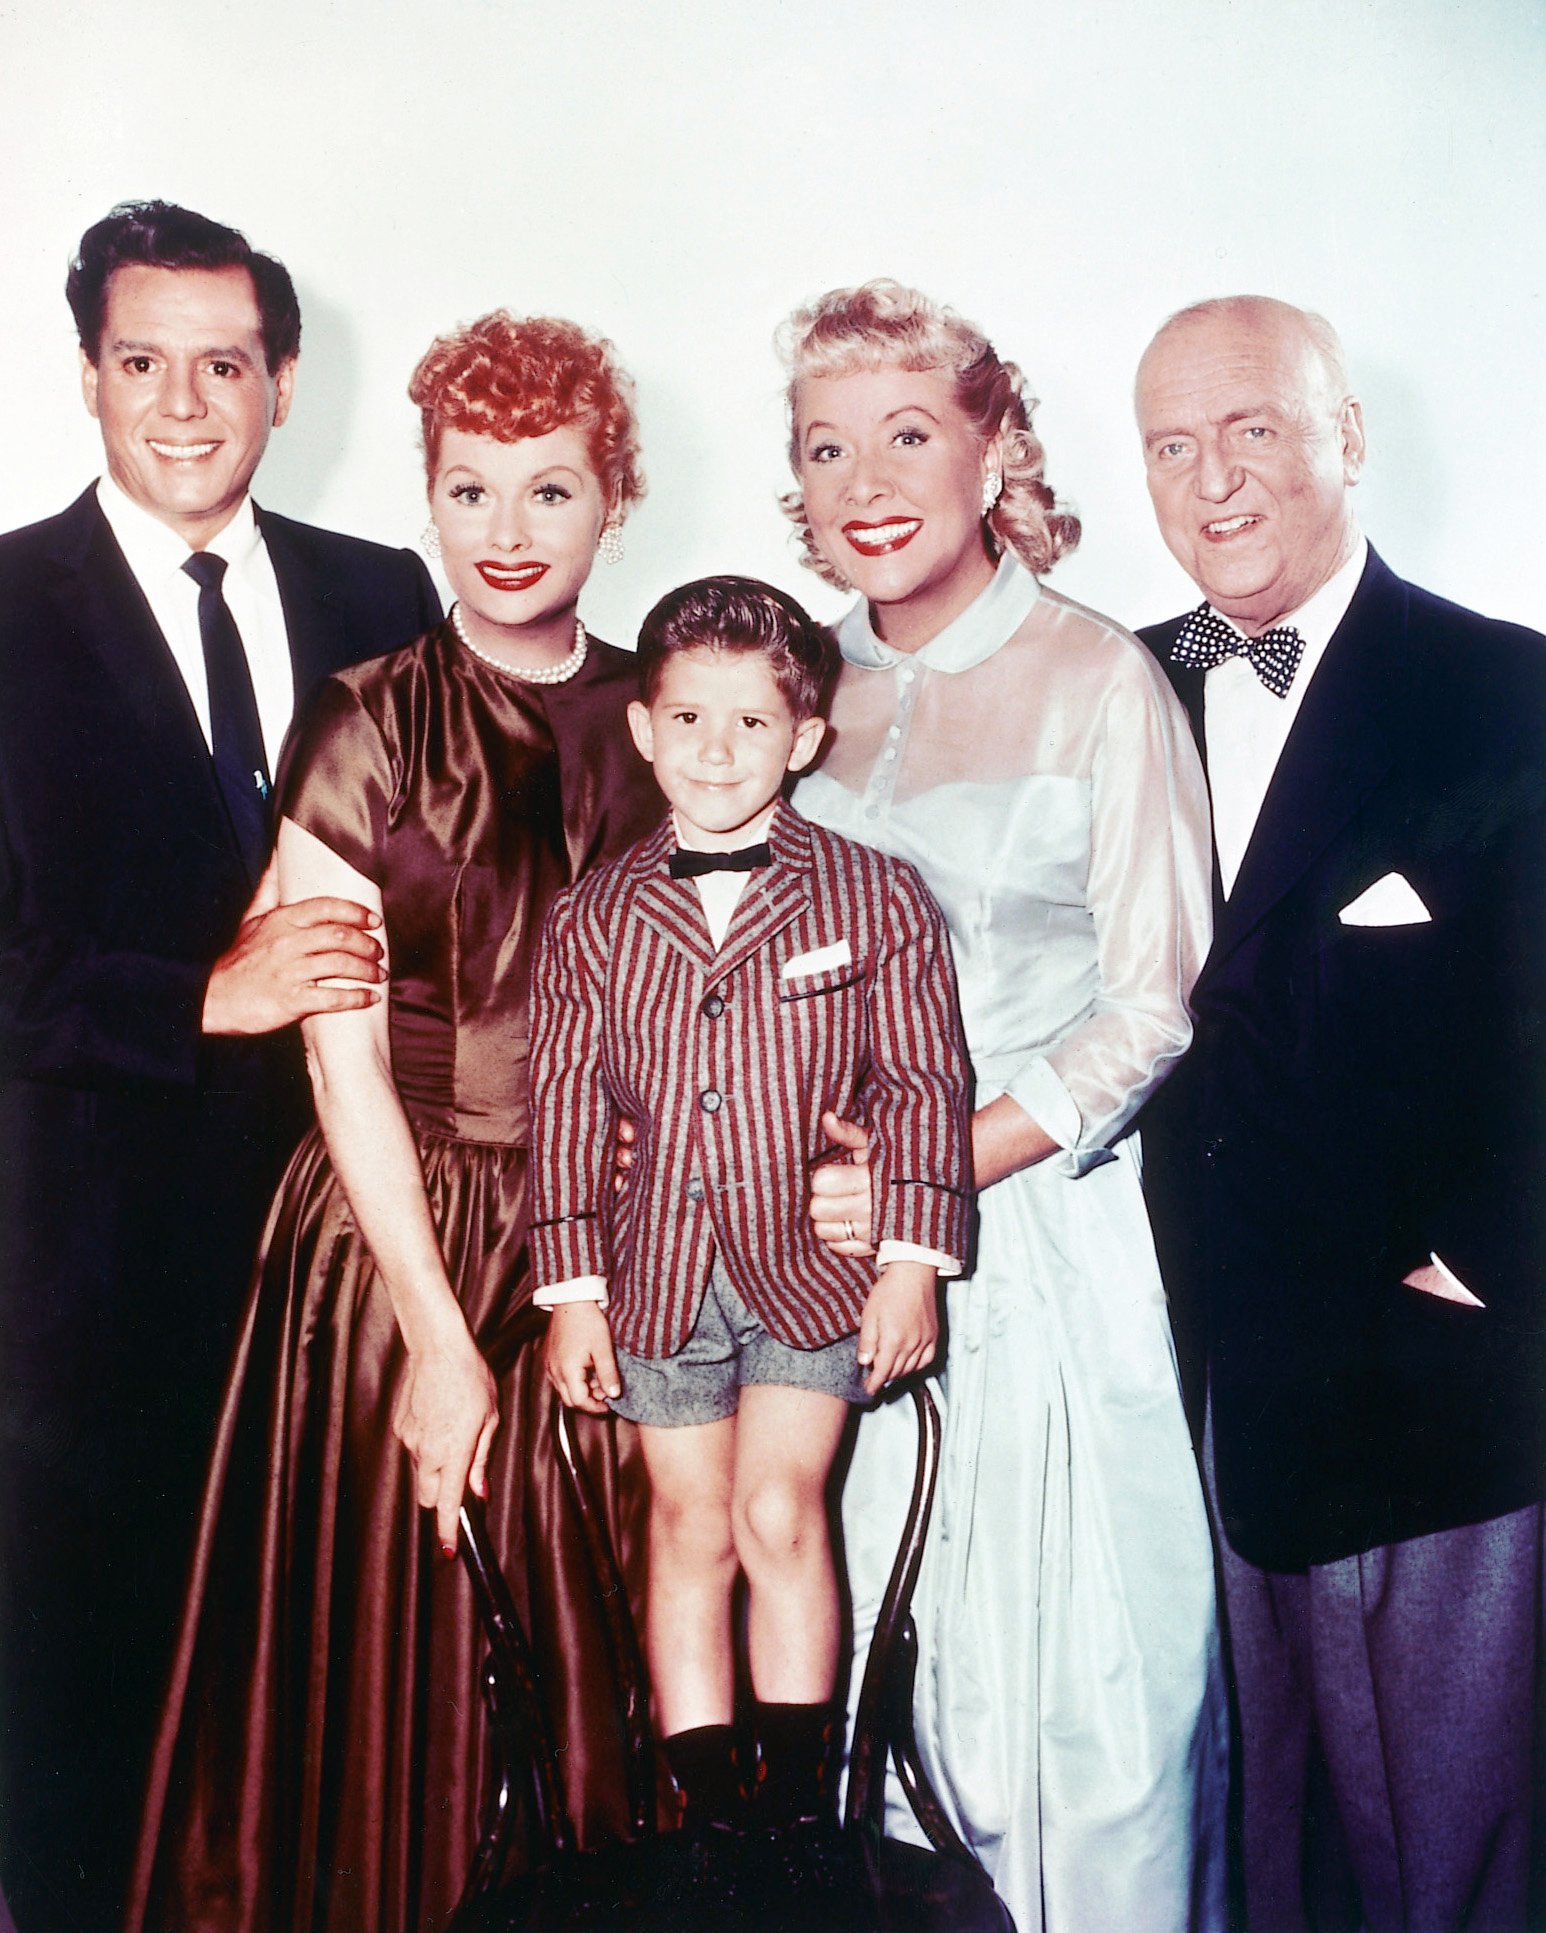 I Love Lucys Little Ricky Actor Keith Thibodeaux On The Last Time He Saw Lucille Ball It Was